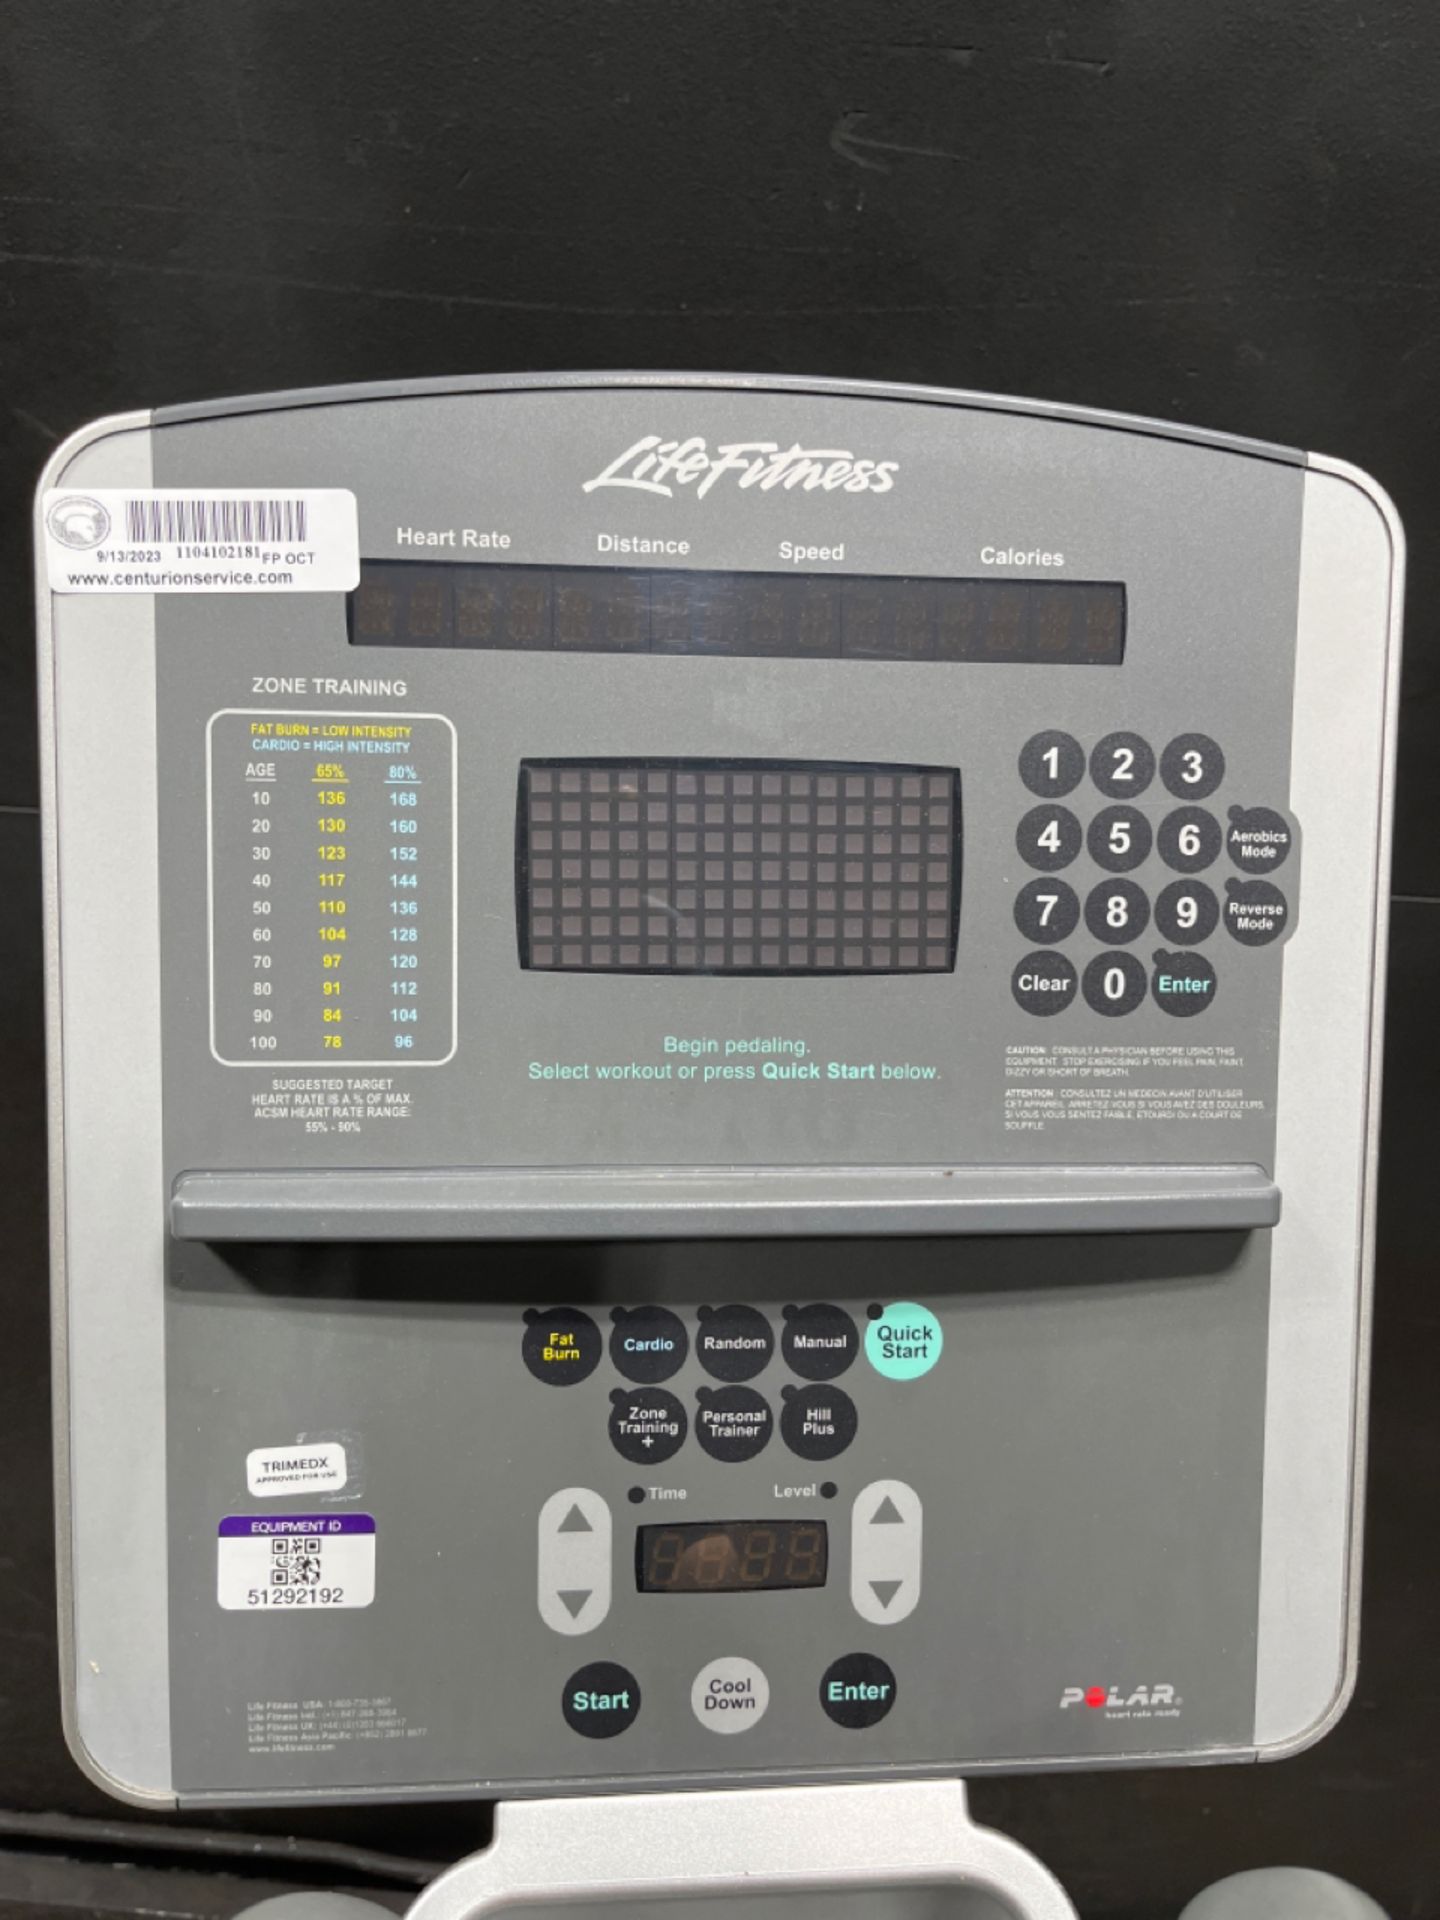 LIFE FITNESS 95XI ELLIPTICAL (LOCATED AT 3325 MOUNT PROSPECT ROAD, FRANKLIN PARK, IL, 60131) - Image 3 of 3